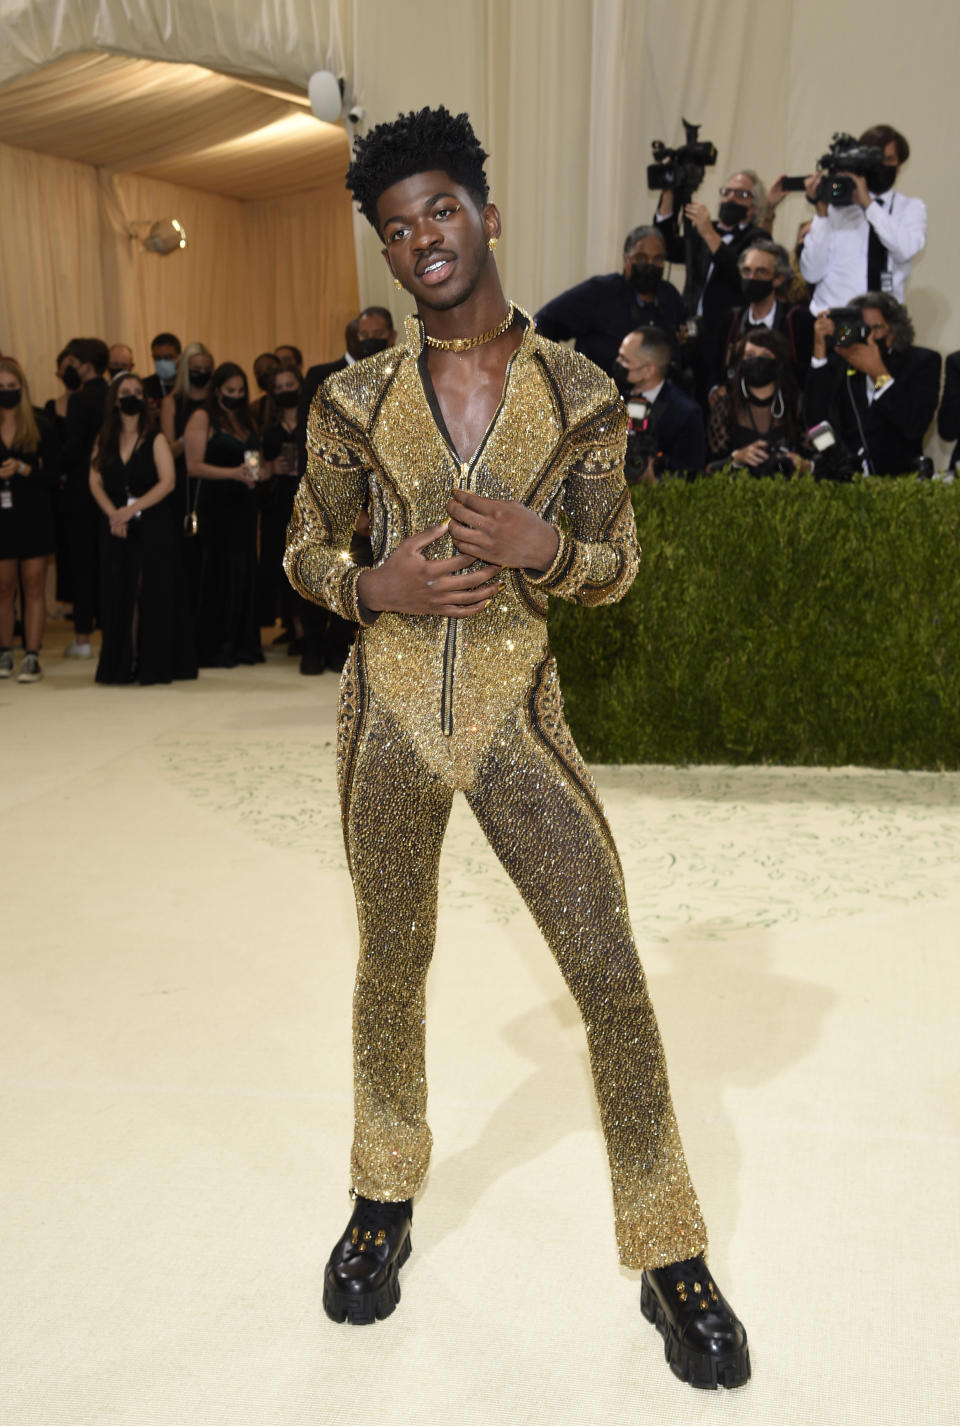 Lil Nas X attends The Metropolitan Museum of Art’s Costume Institute benefit gala celebrating the opening of the “In America: A Lexicon of Fashion” exhibition on Sept. 13, 2021, in New York. - Credit: Invision